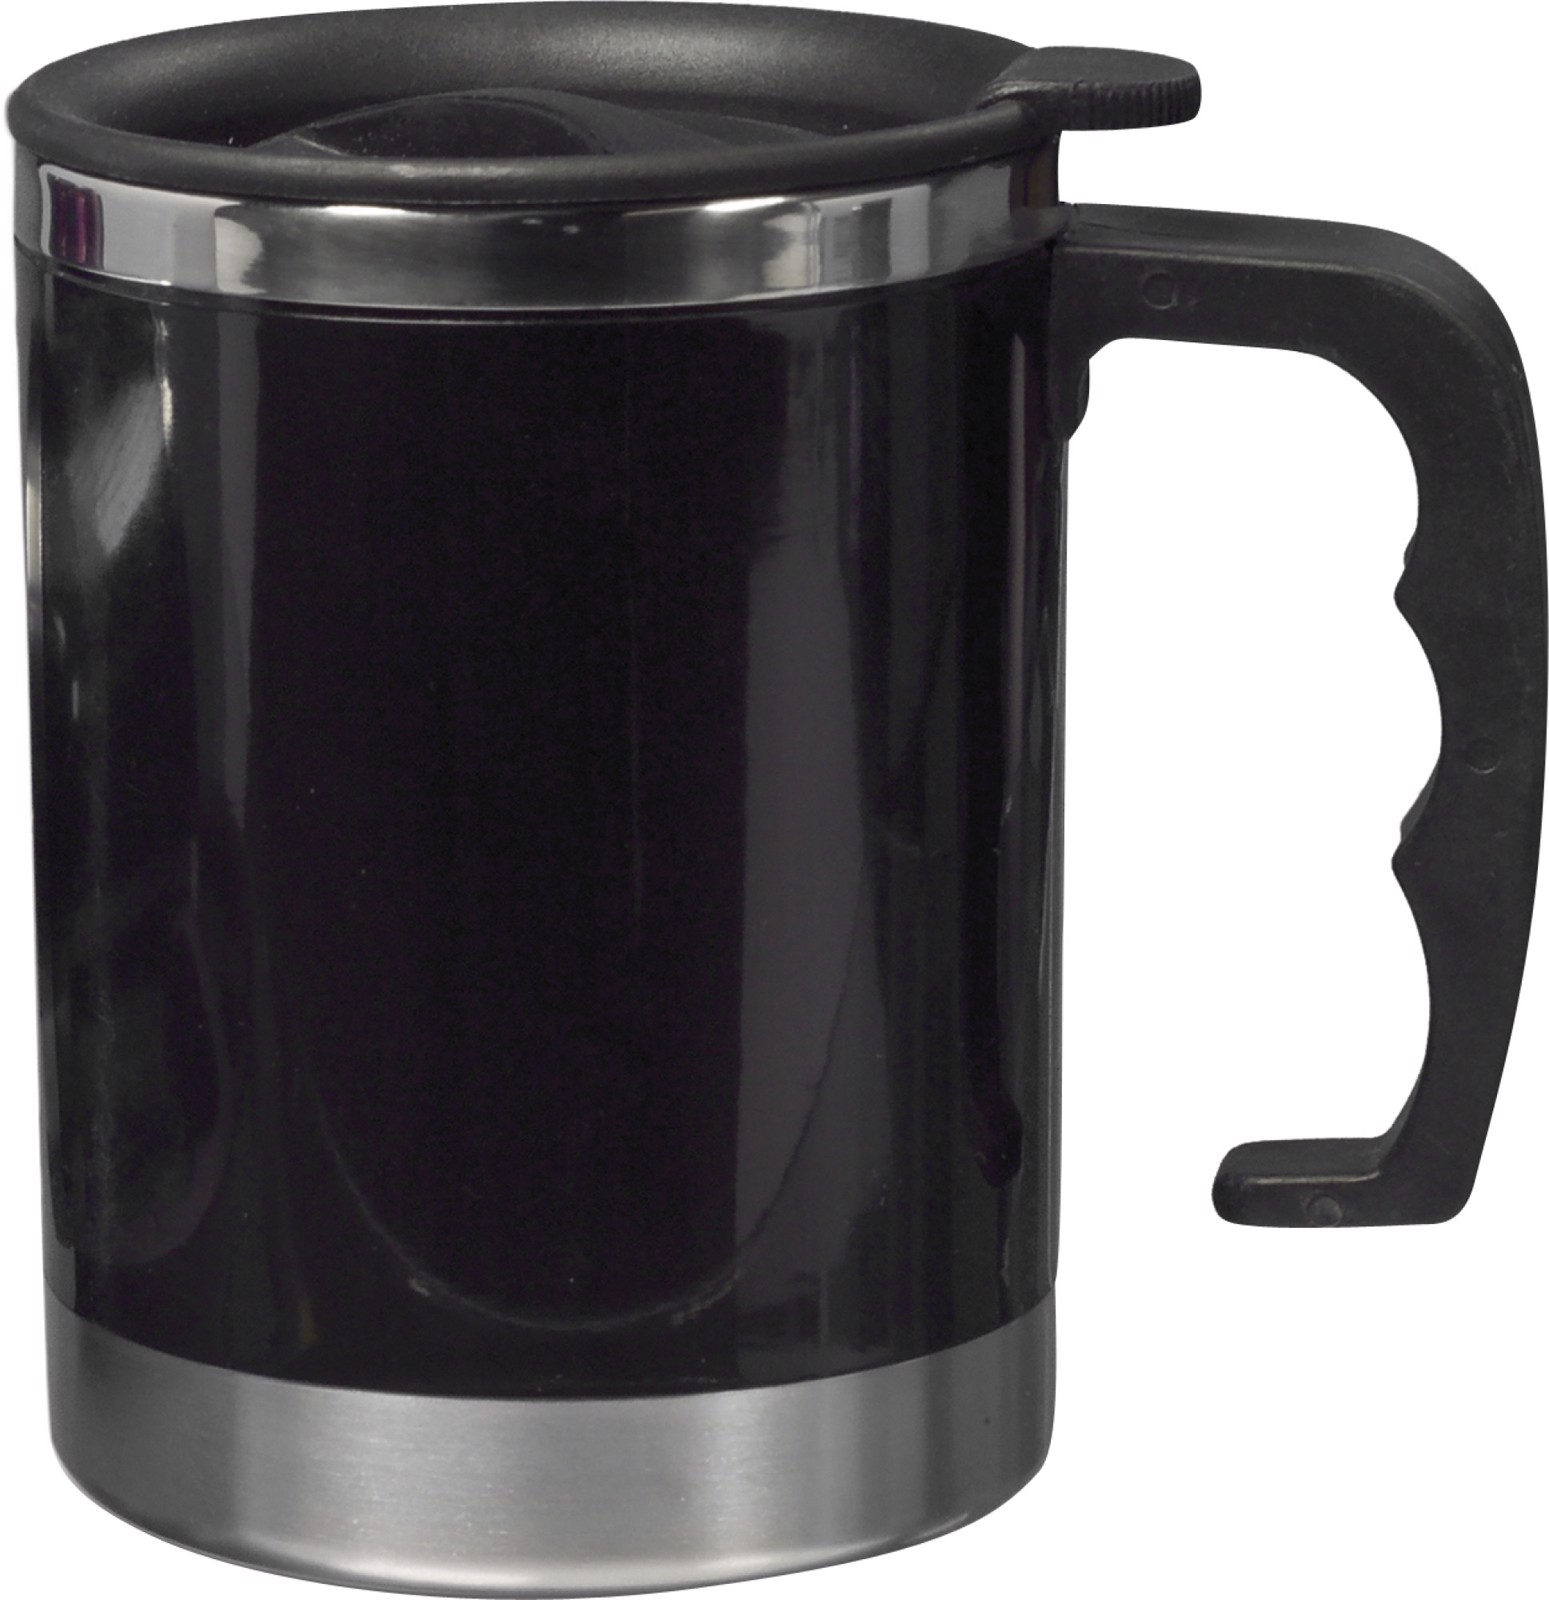 Stainless steel and AS double walled mug - Black